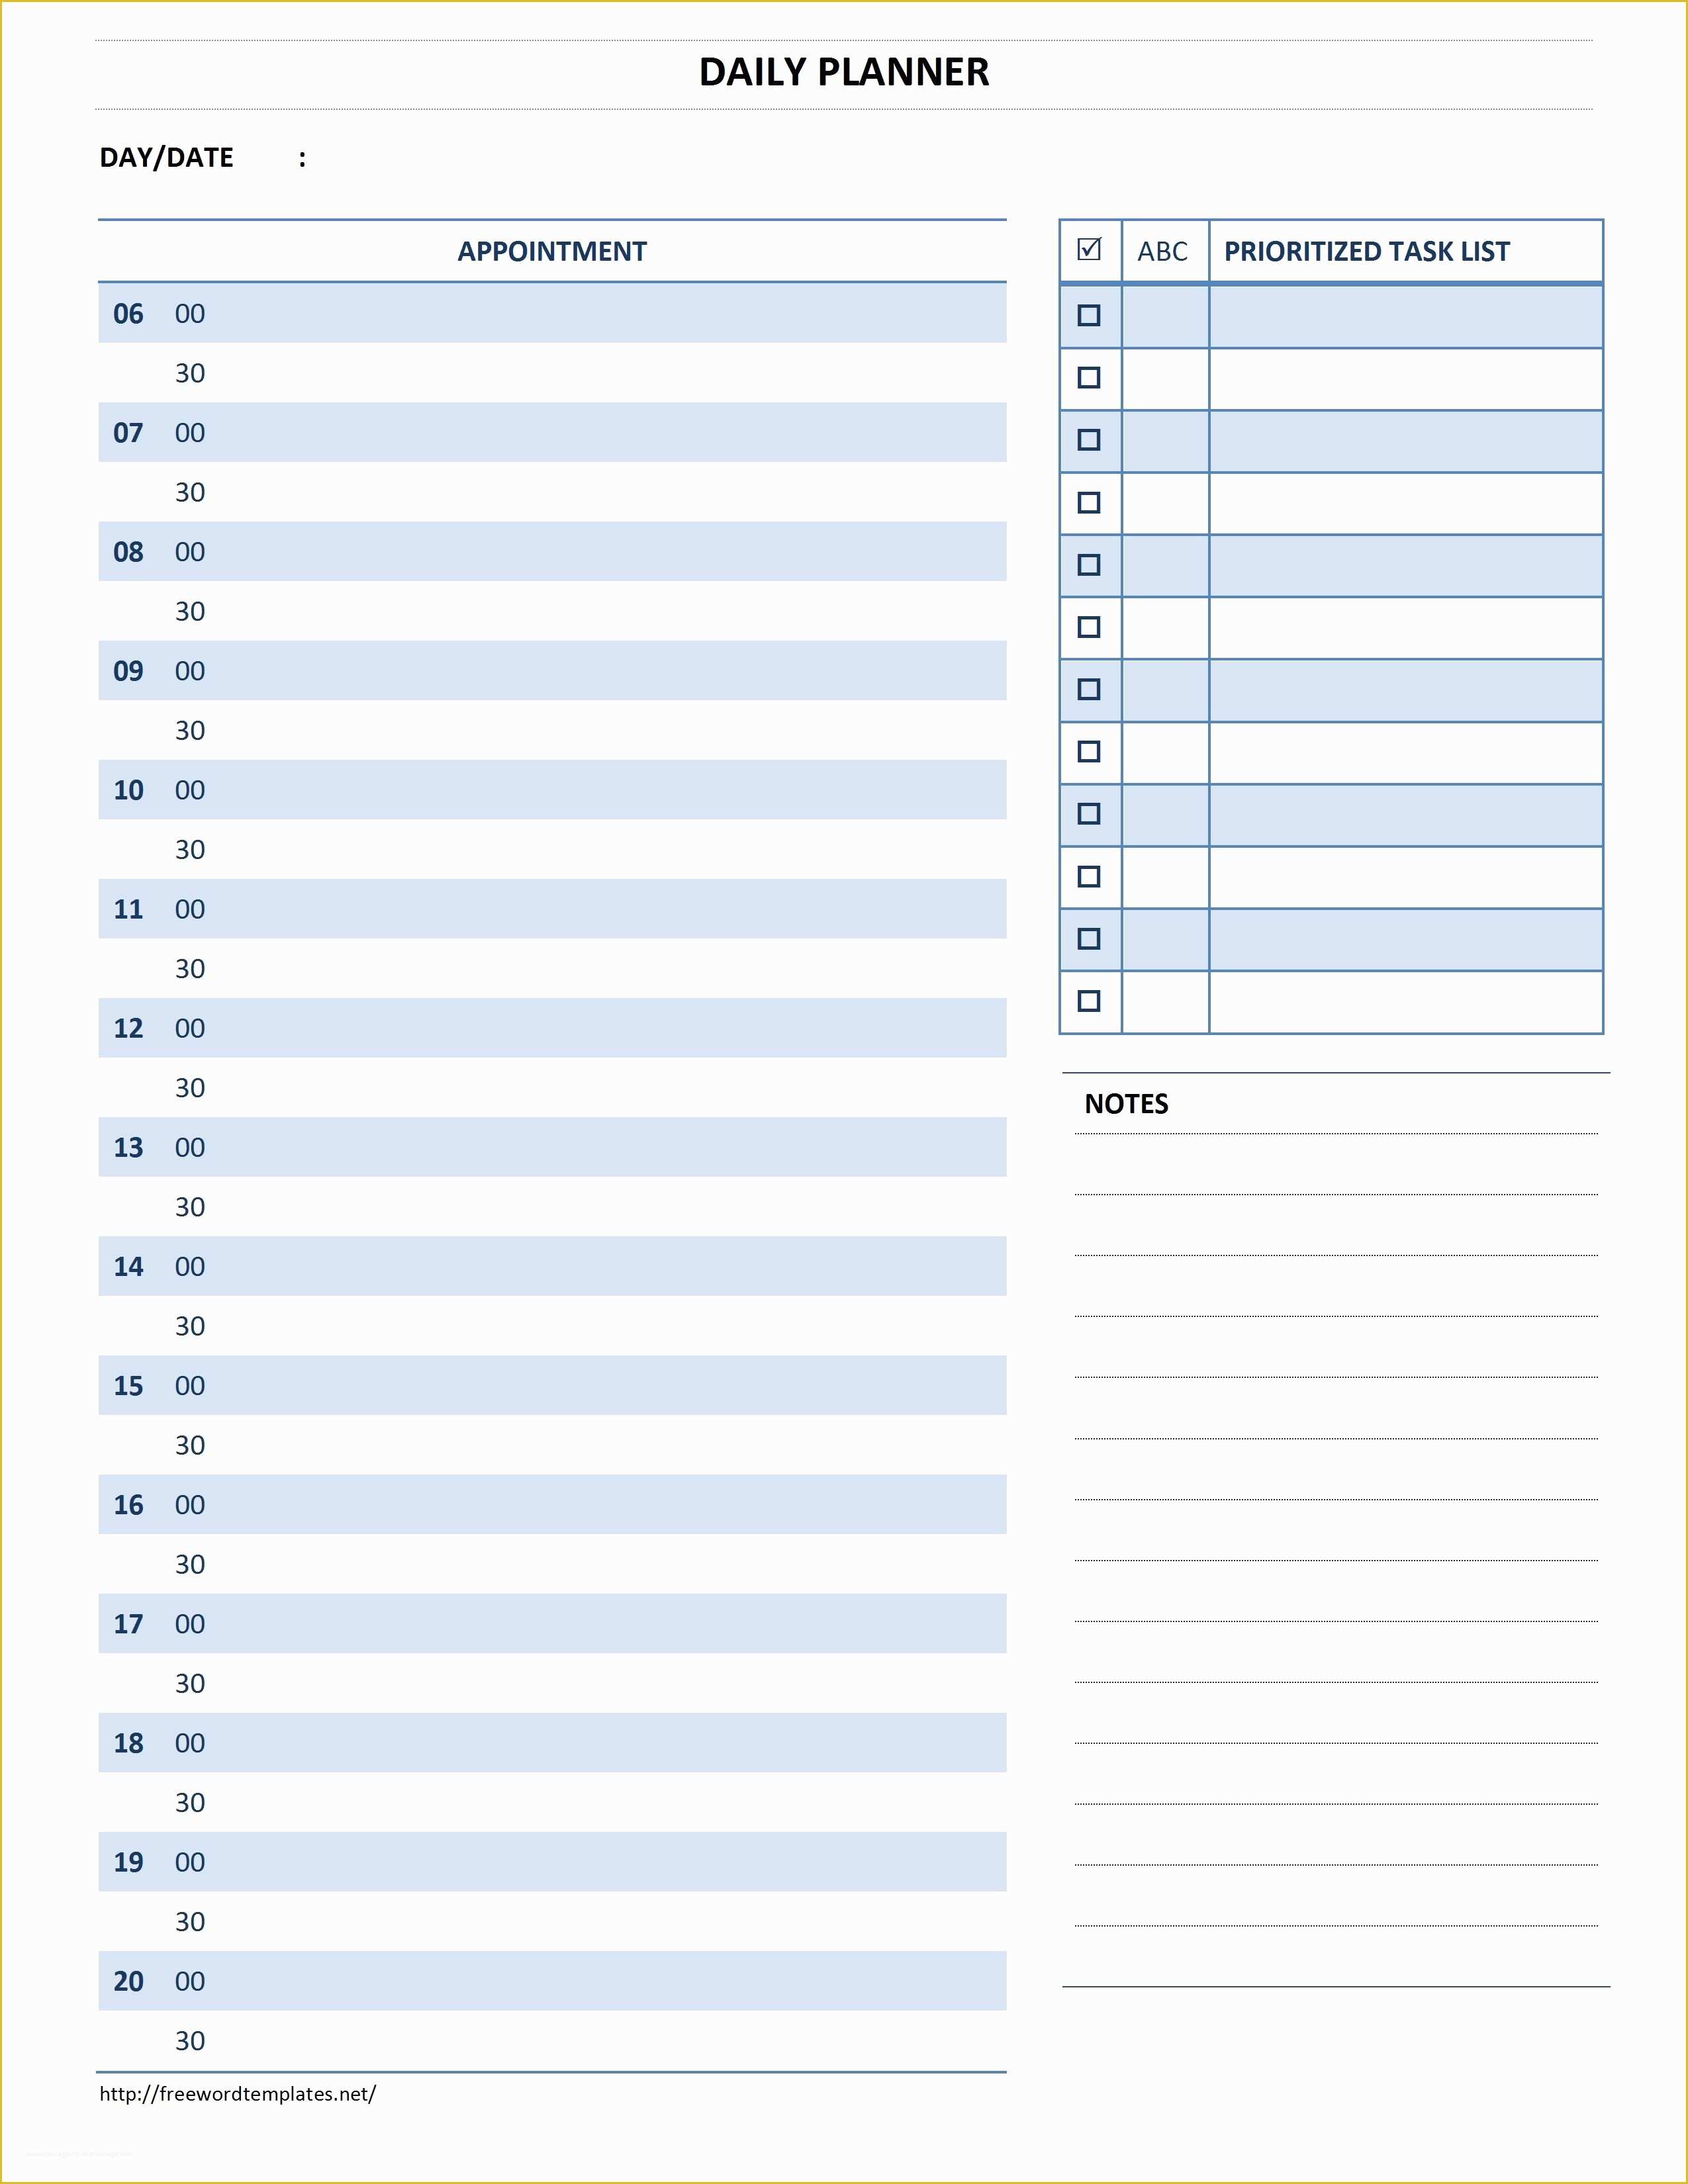 Free Daily Planner Template Of Free Daily Planner Template B35pgmbm